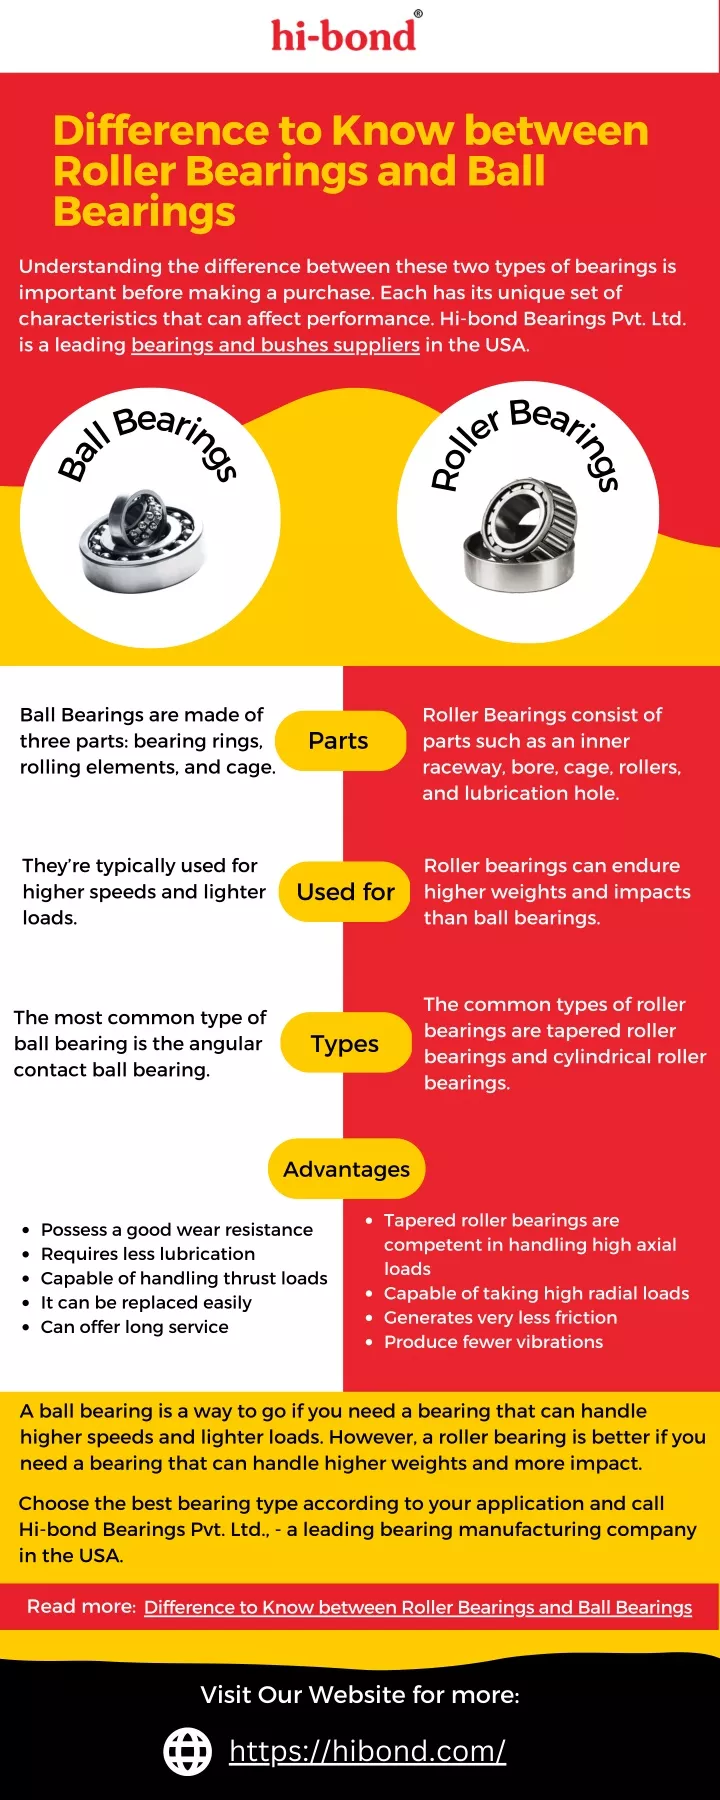 difference to know between roller bearings